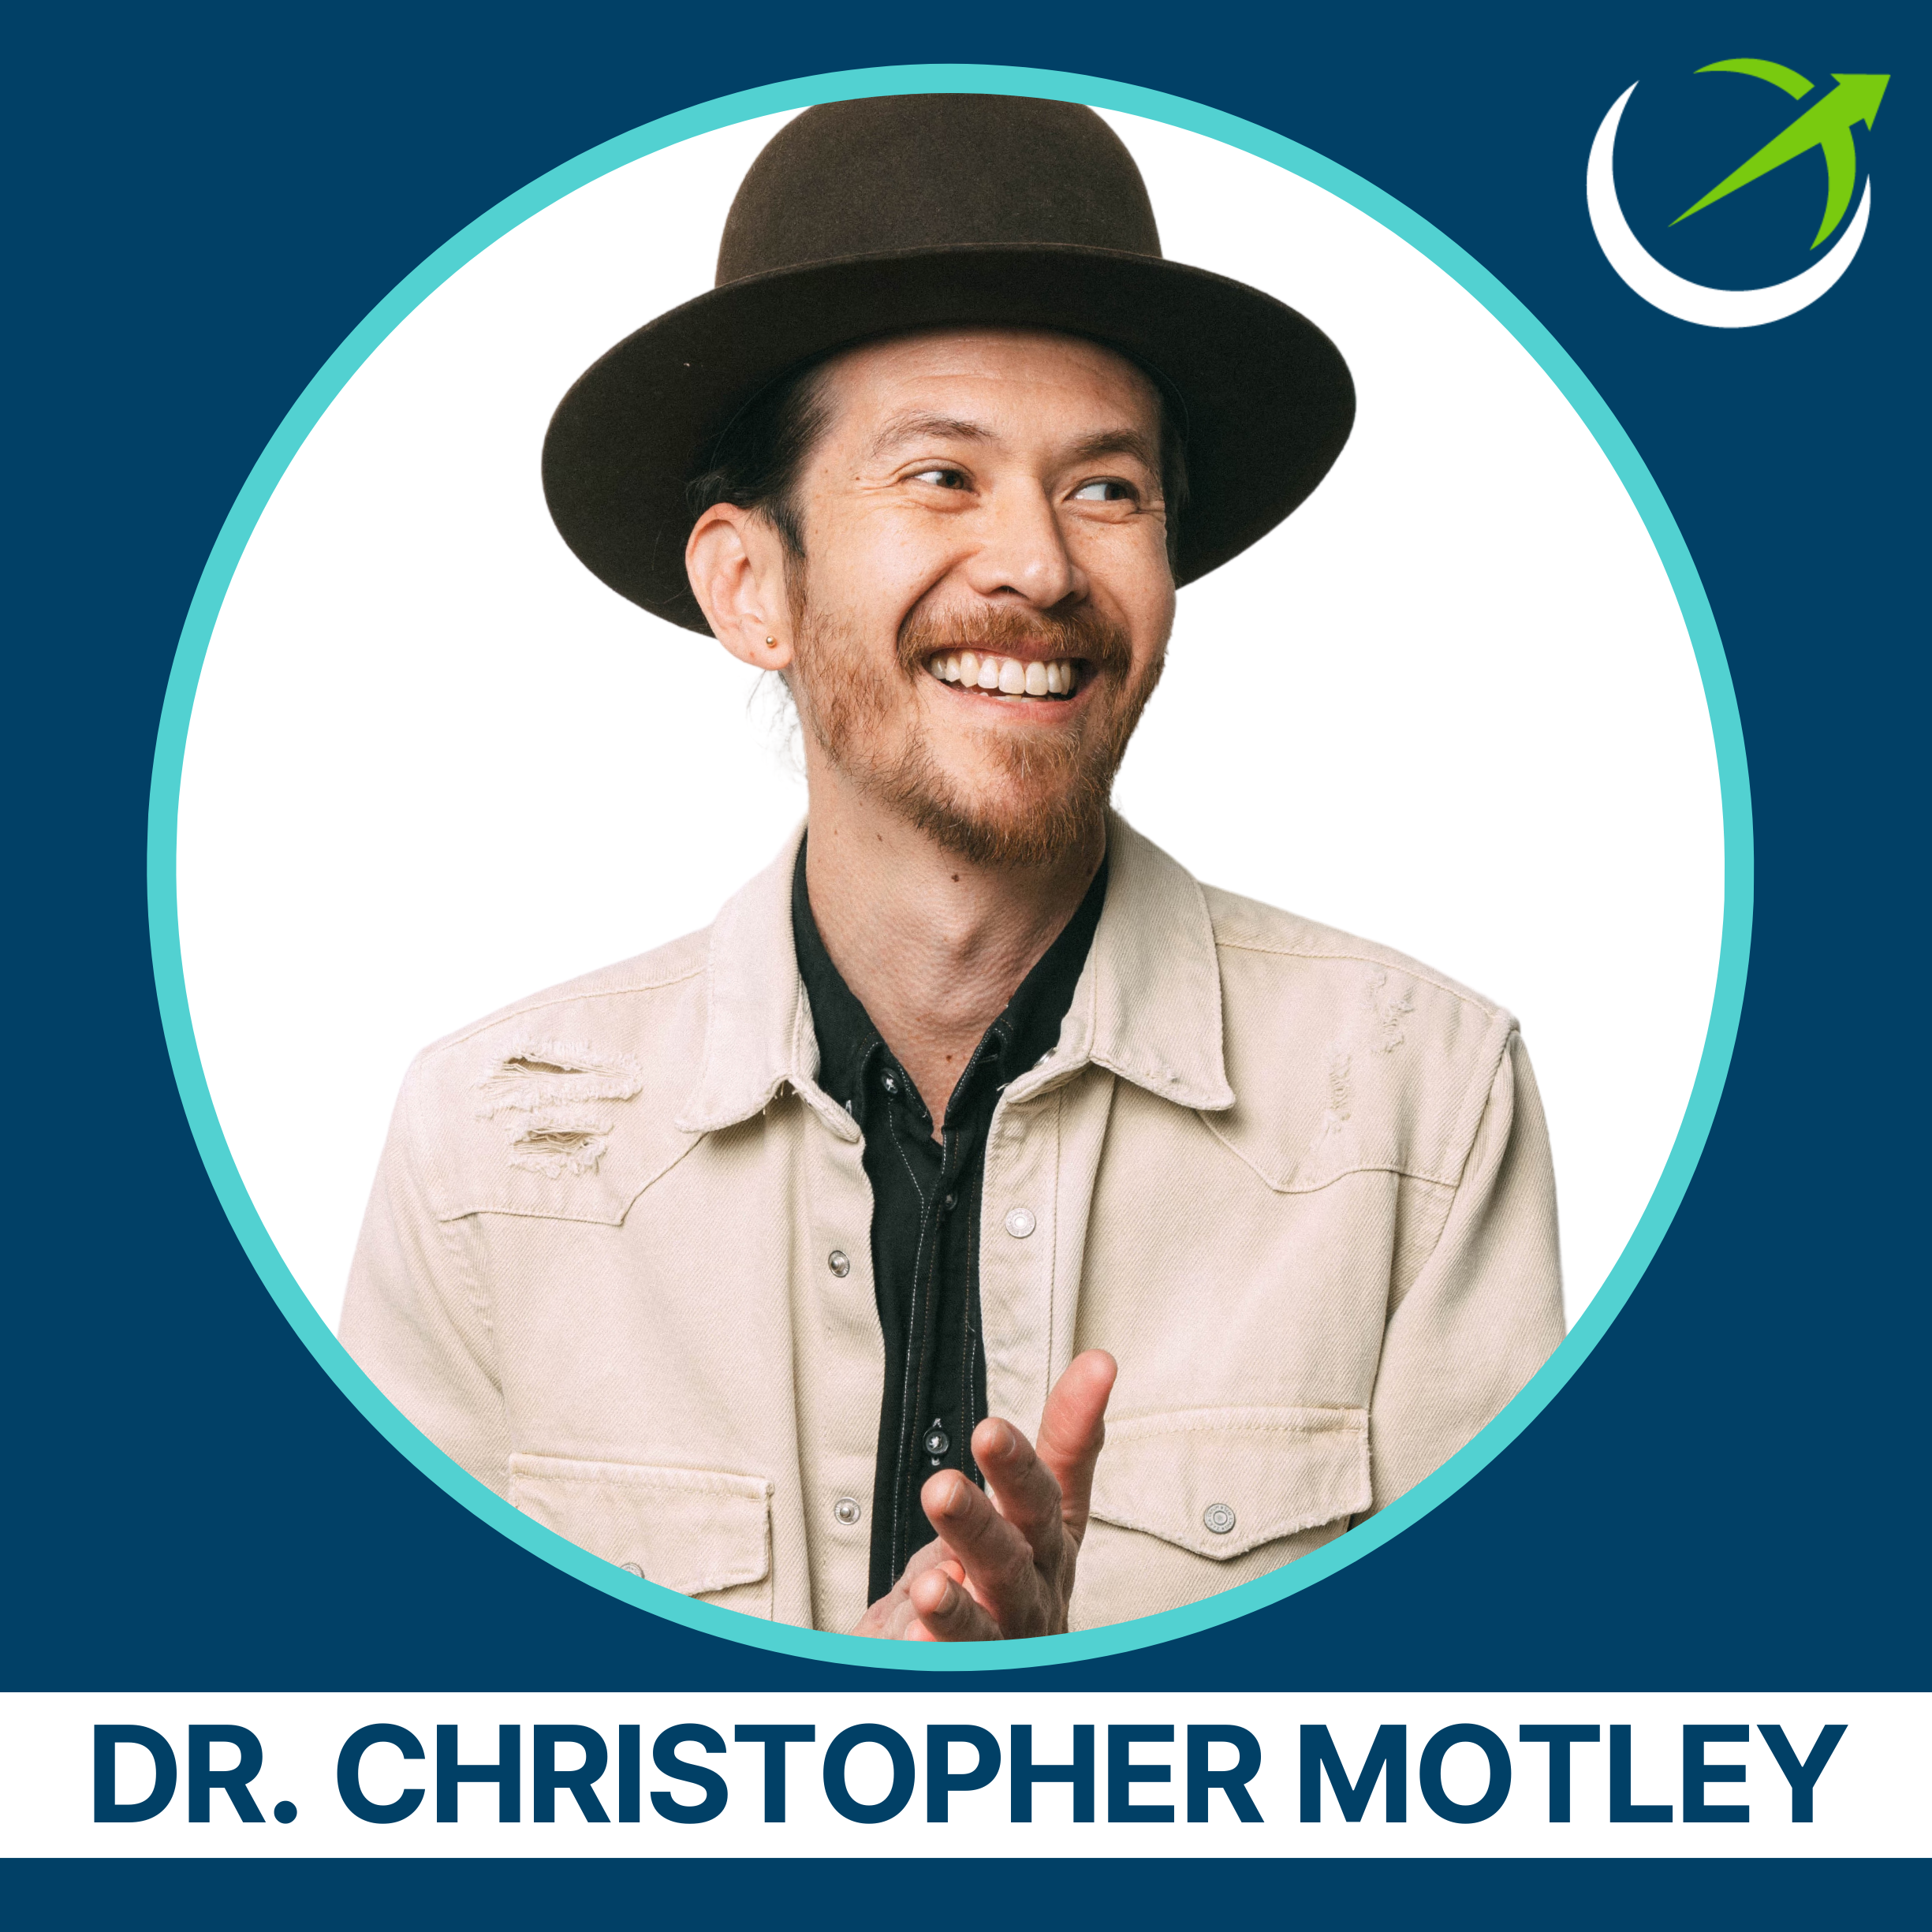 The Ultimate Eastern Medicine Approach To Lyme, Epstein-Barr, Parasites, Viruses, Gut Issues & More With Dr. Chris Motley